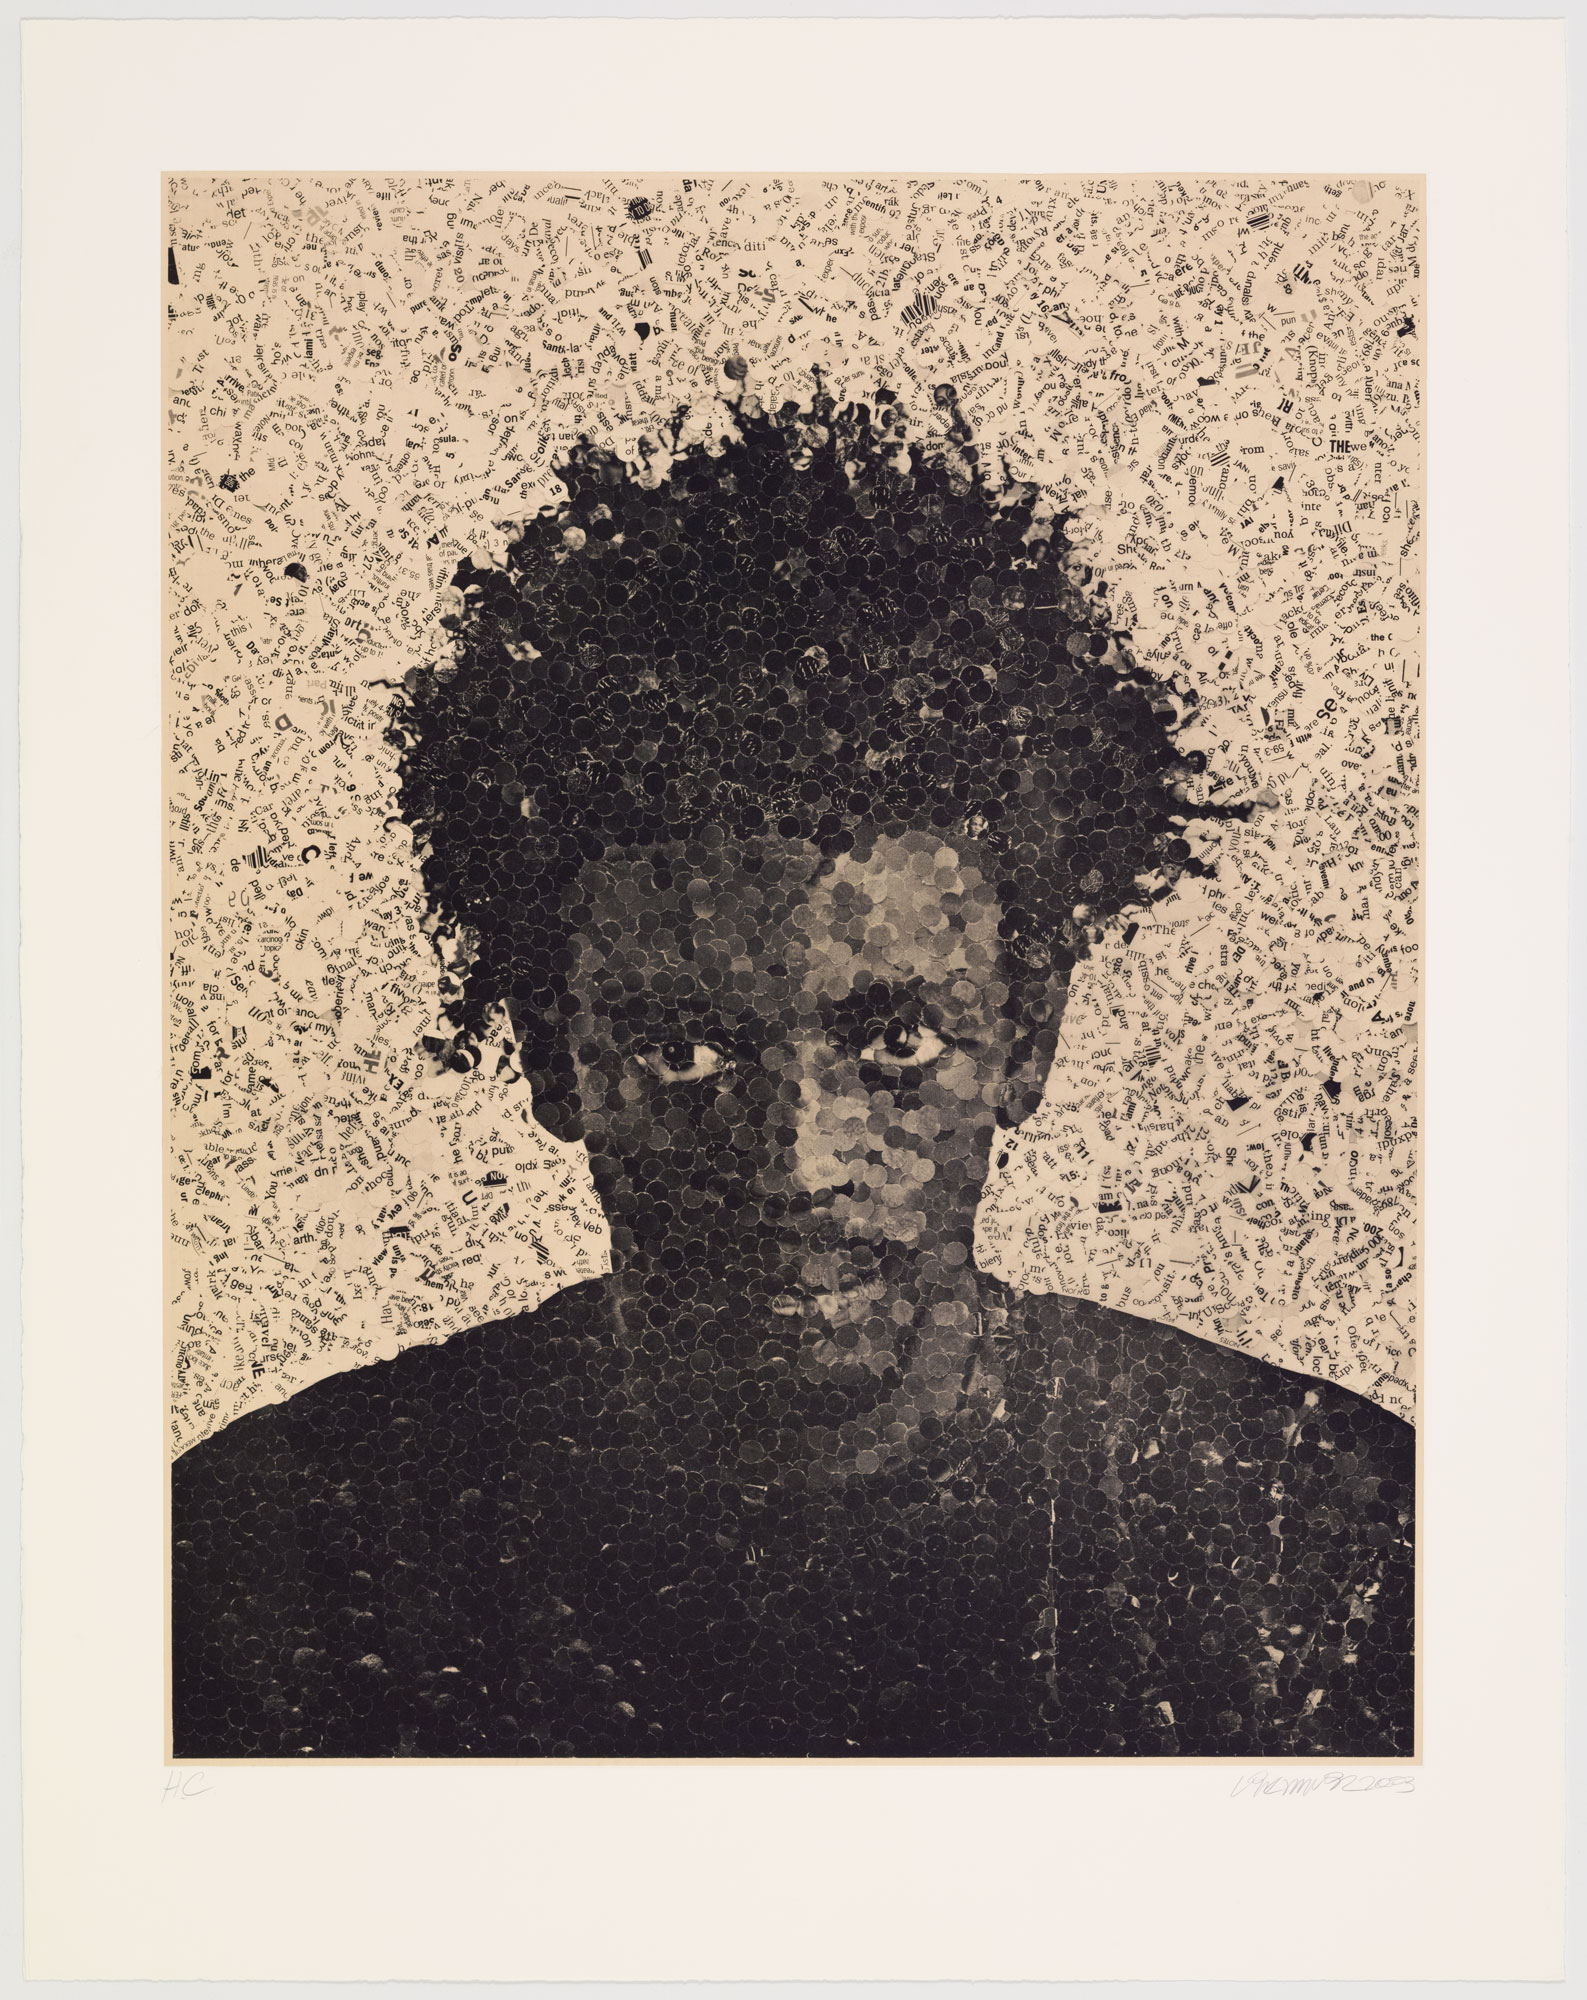 Lorna Simpson
Two Pairs, 1997
photogravure
20 x 26 in.
Published by Graphicstudio, University of South Florida Collection